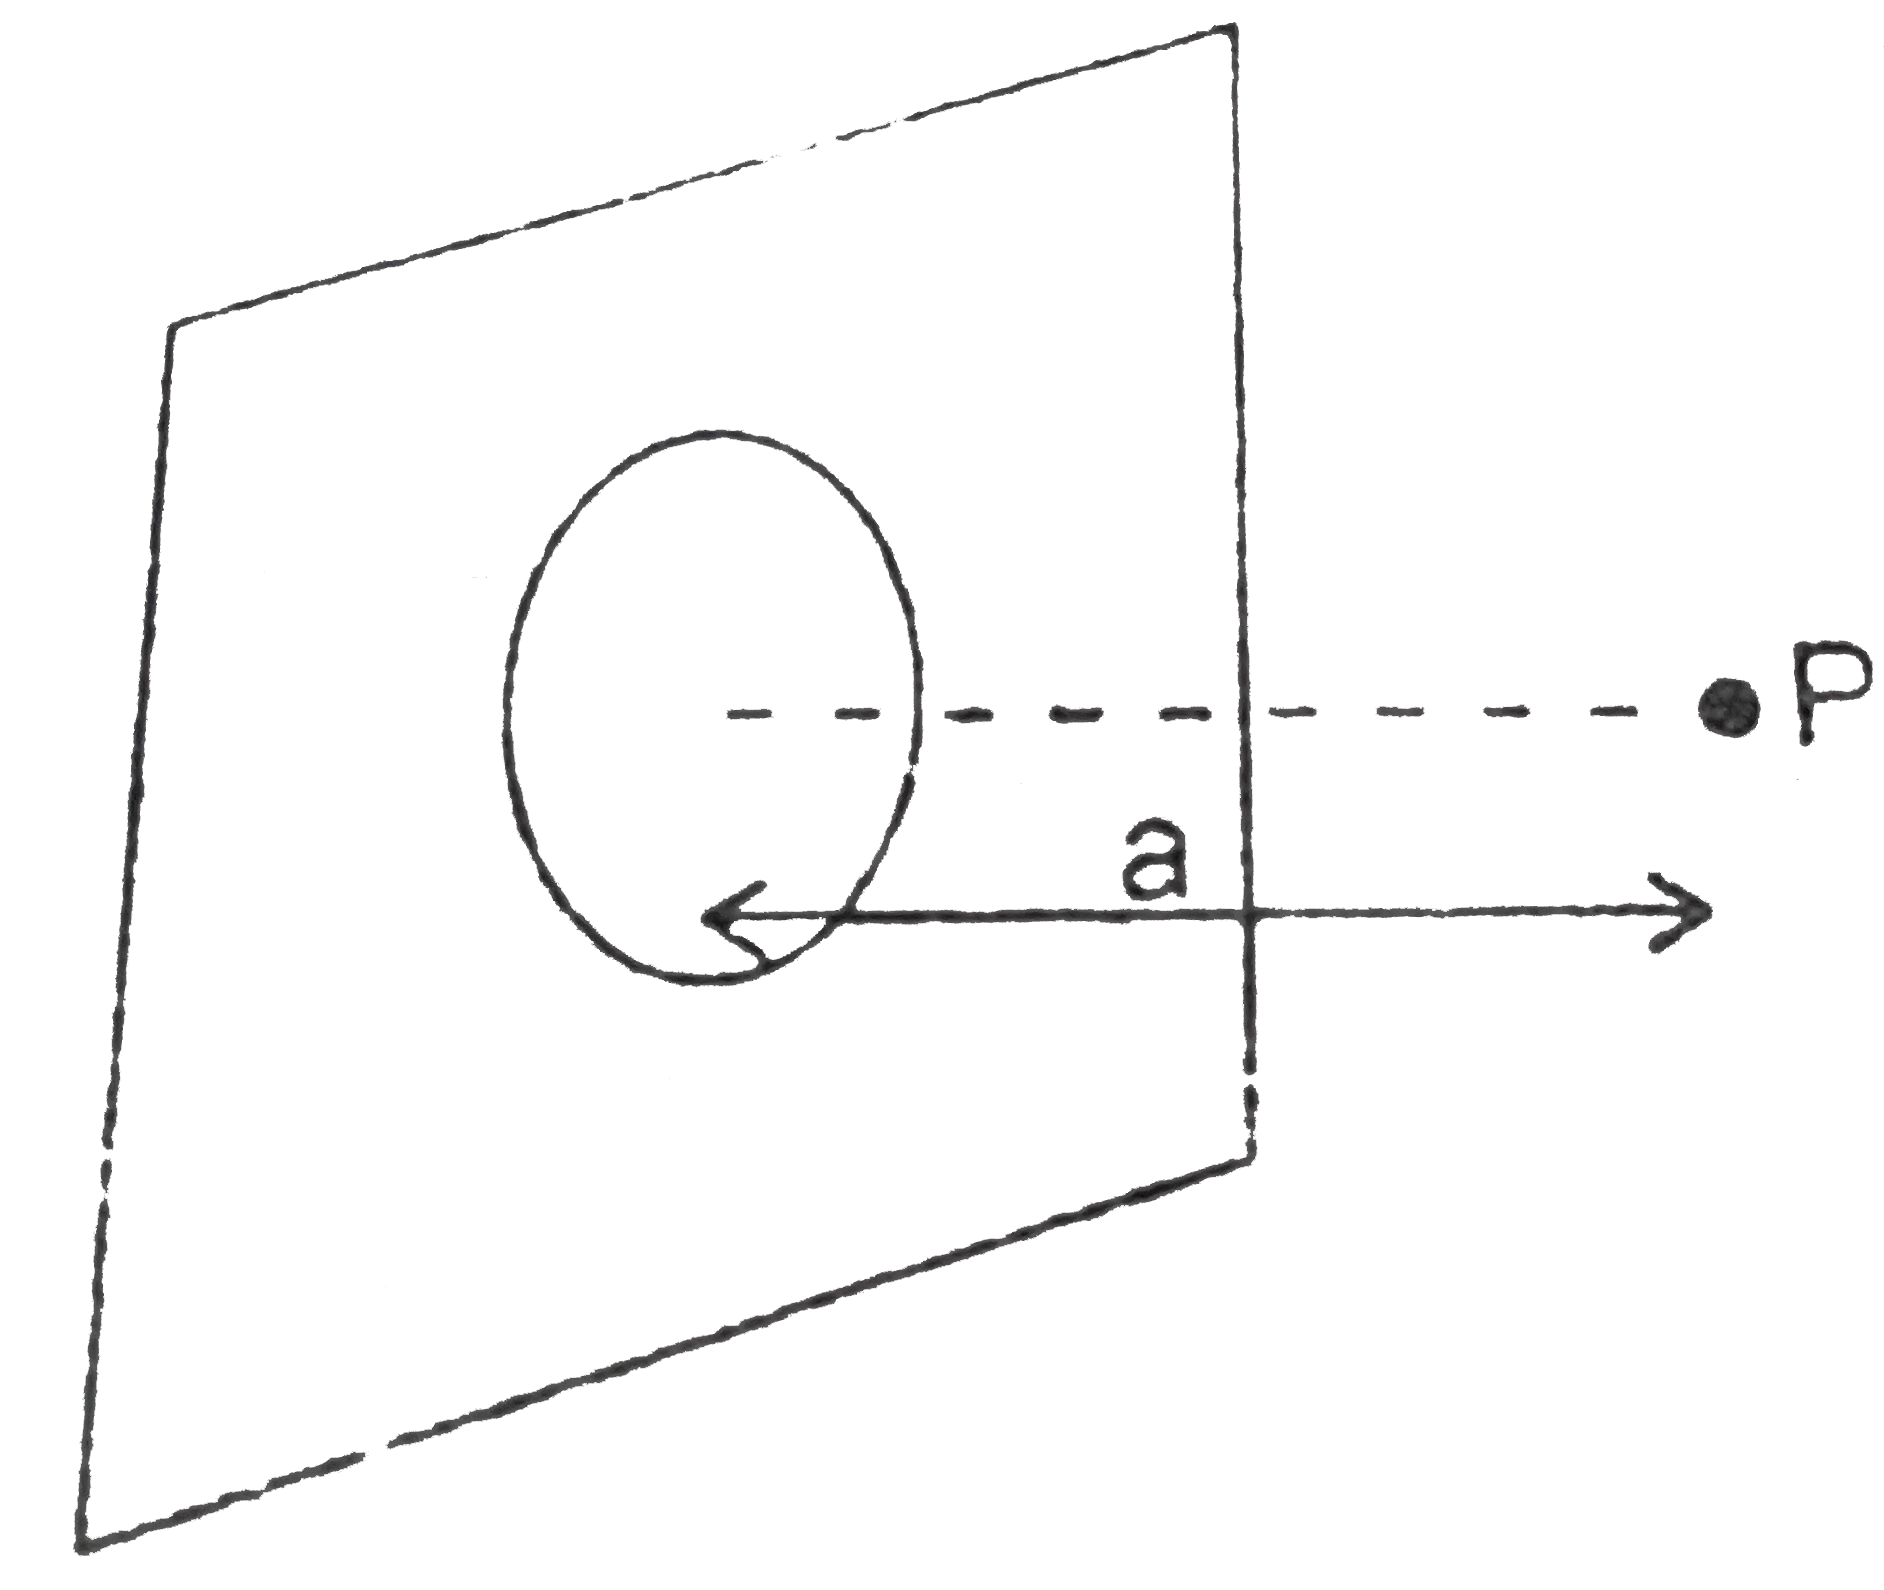 An infinitely large non-conducting plane of uniform surface charge density sigma has circular aperture of certain radius carved out from it. The electric field at a point which is at a distance 'a' from the centre of the aperture (perpendicular to the plane) is (sigma)/(2 sqrt(2) in(0)). Find the radius of aperture :